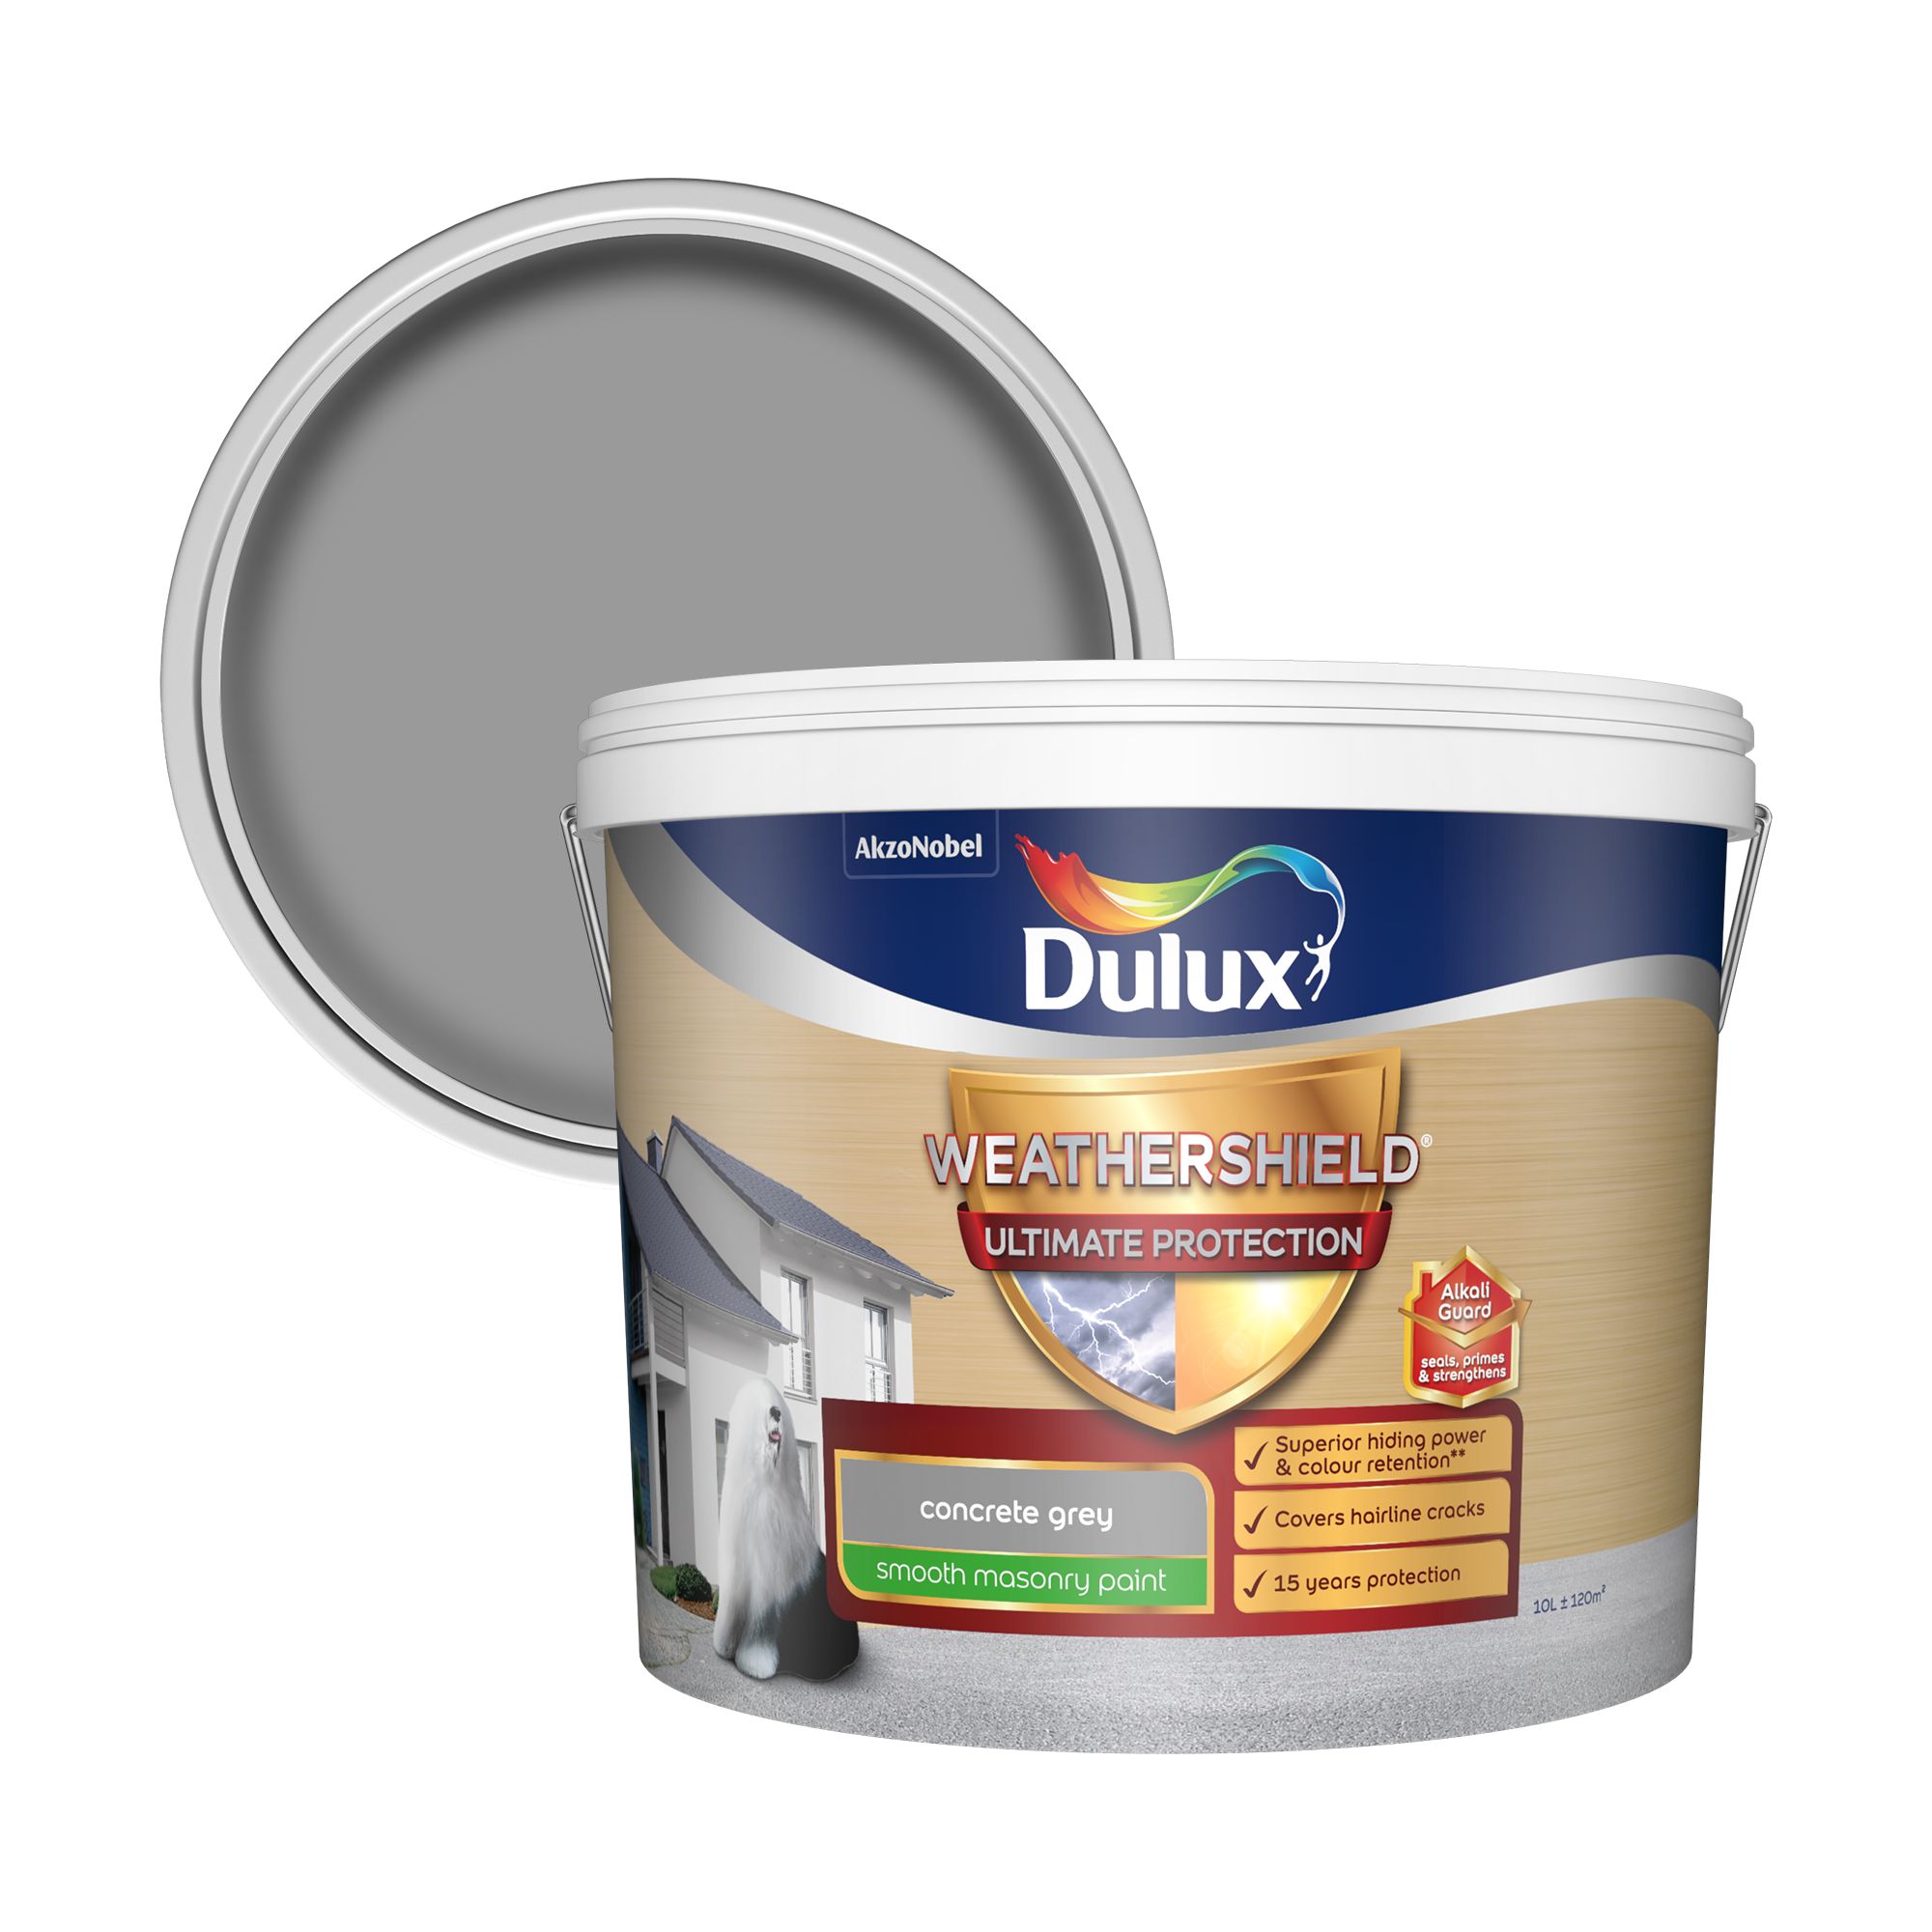  Dulux  Weathershield  ultimate protection Concrete  grey 